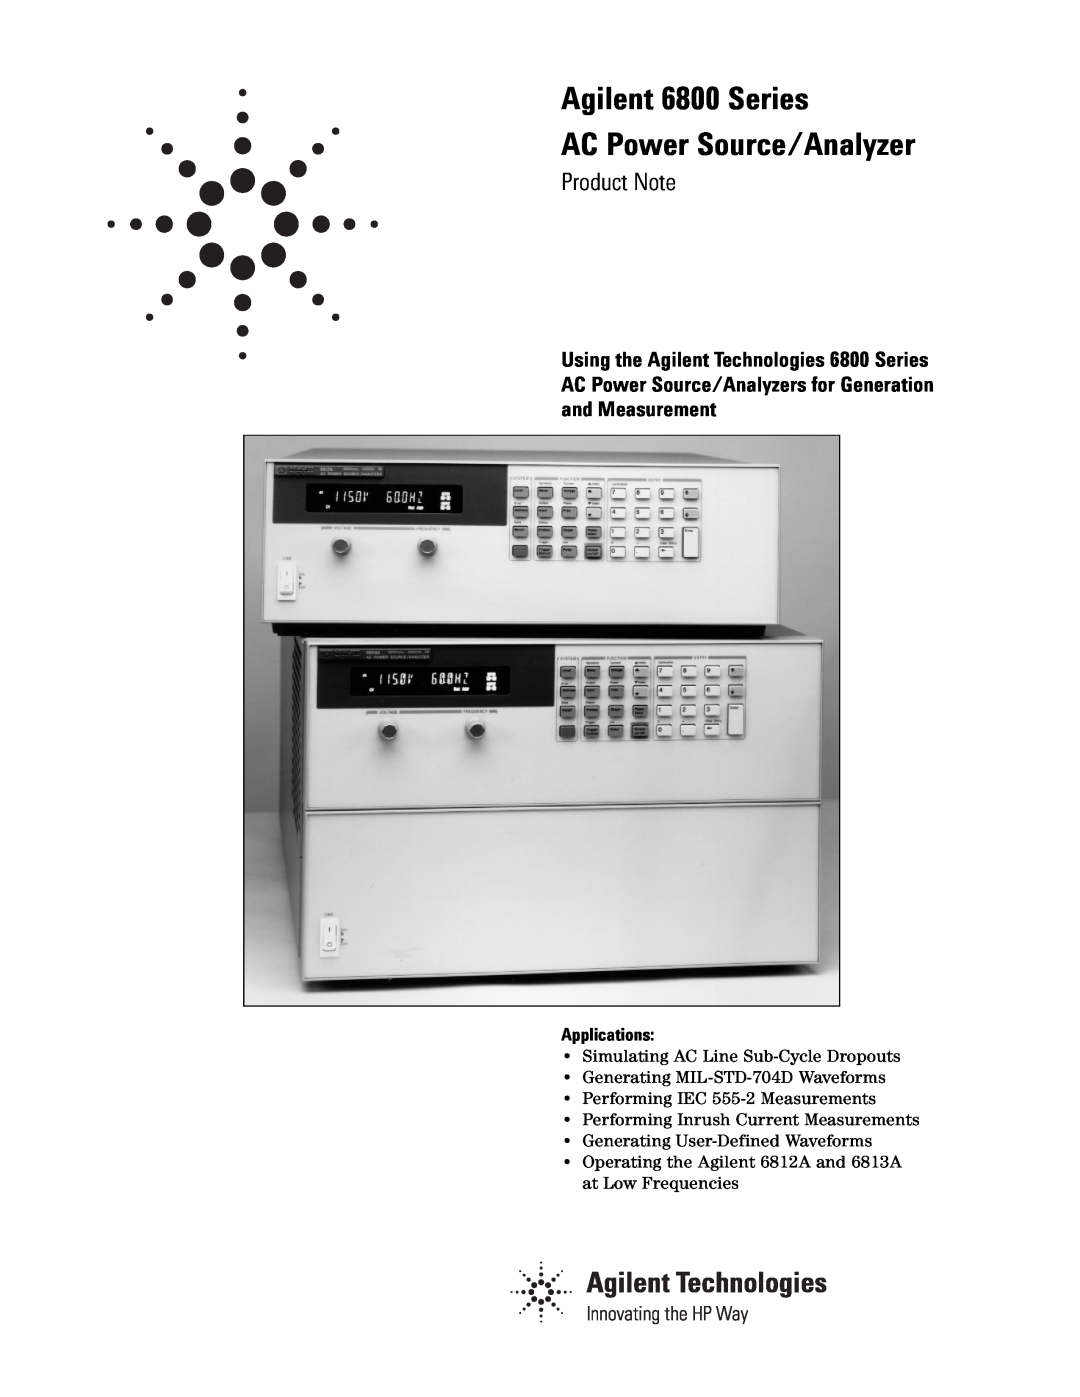 Agilent Technologies manual Agilent 6800 Series AC Power Source/Analyzer, Applications, Product Note 